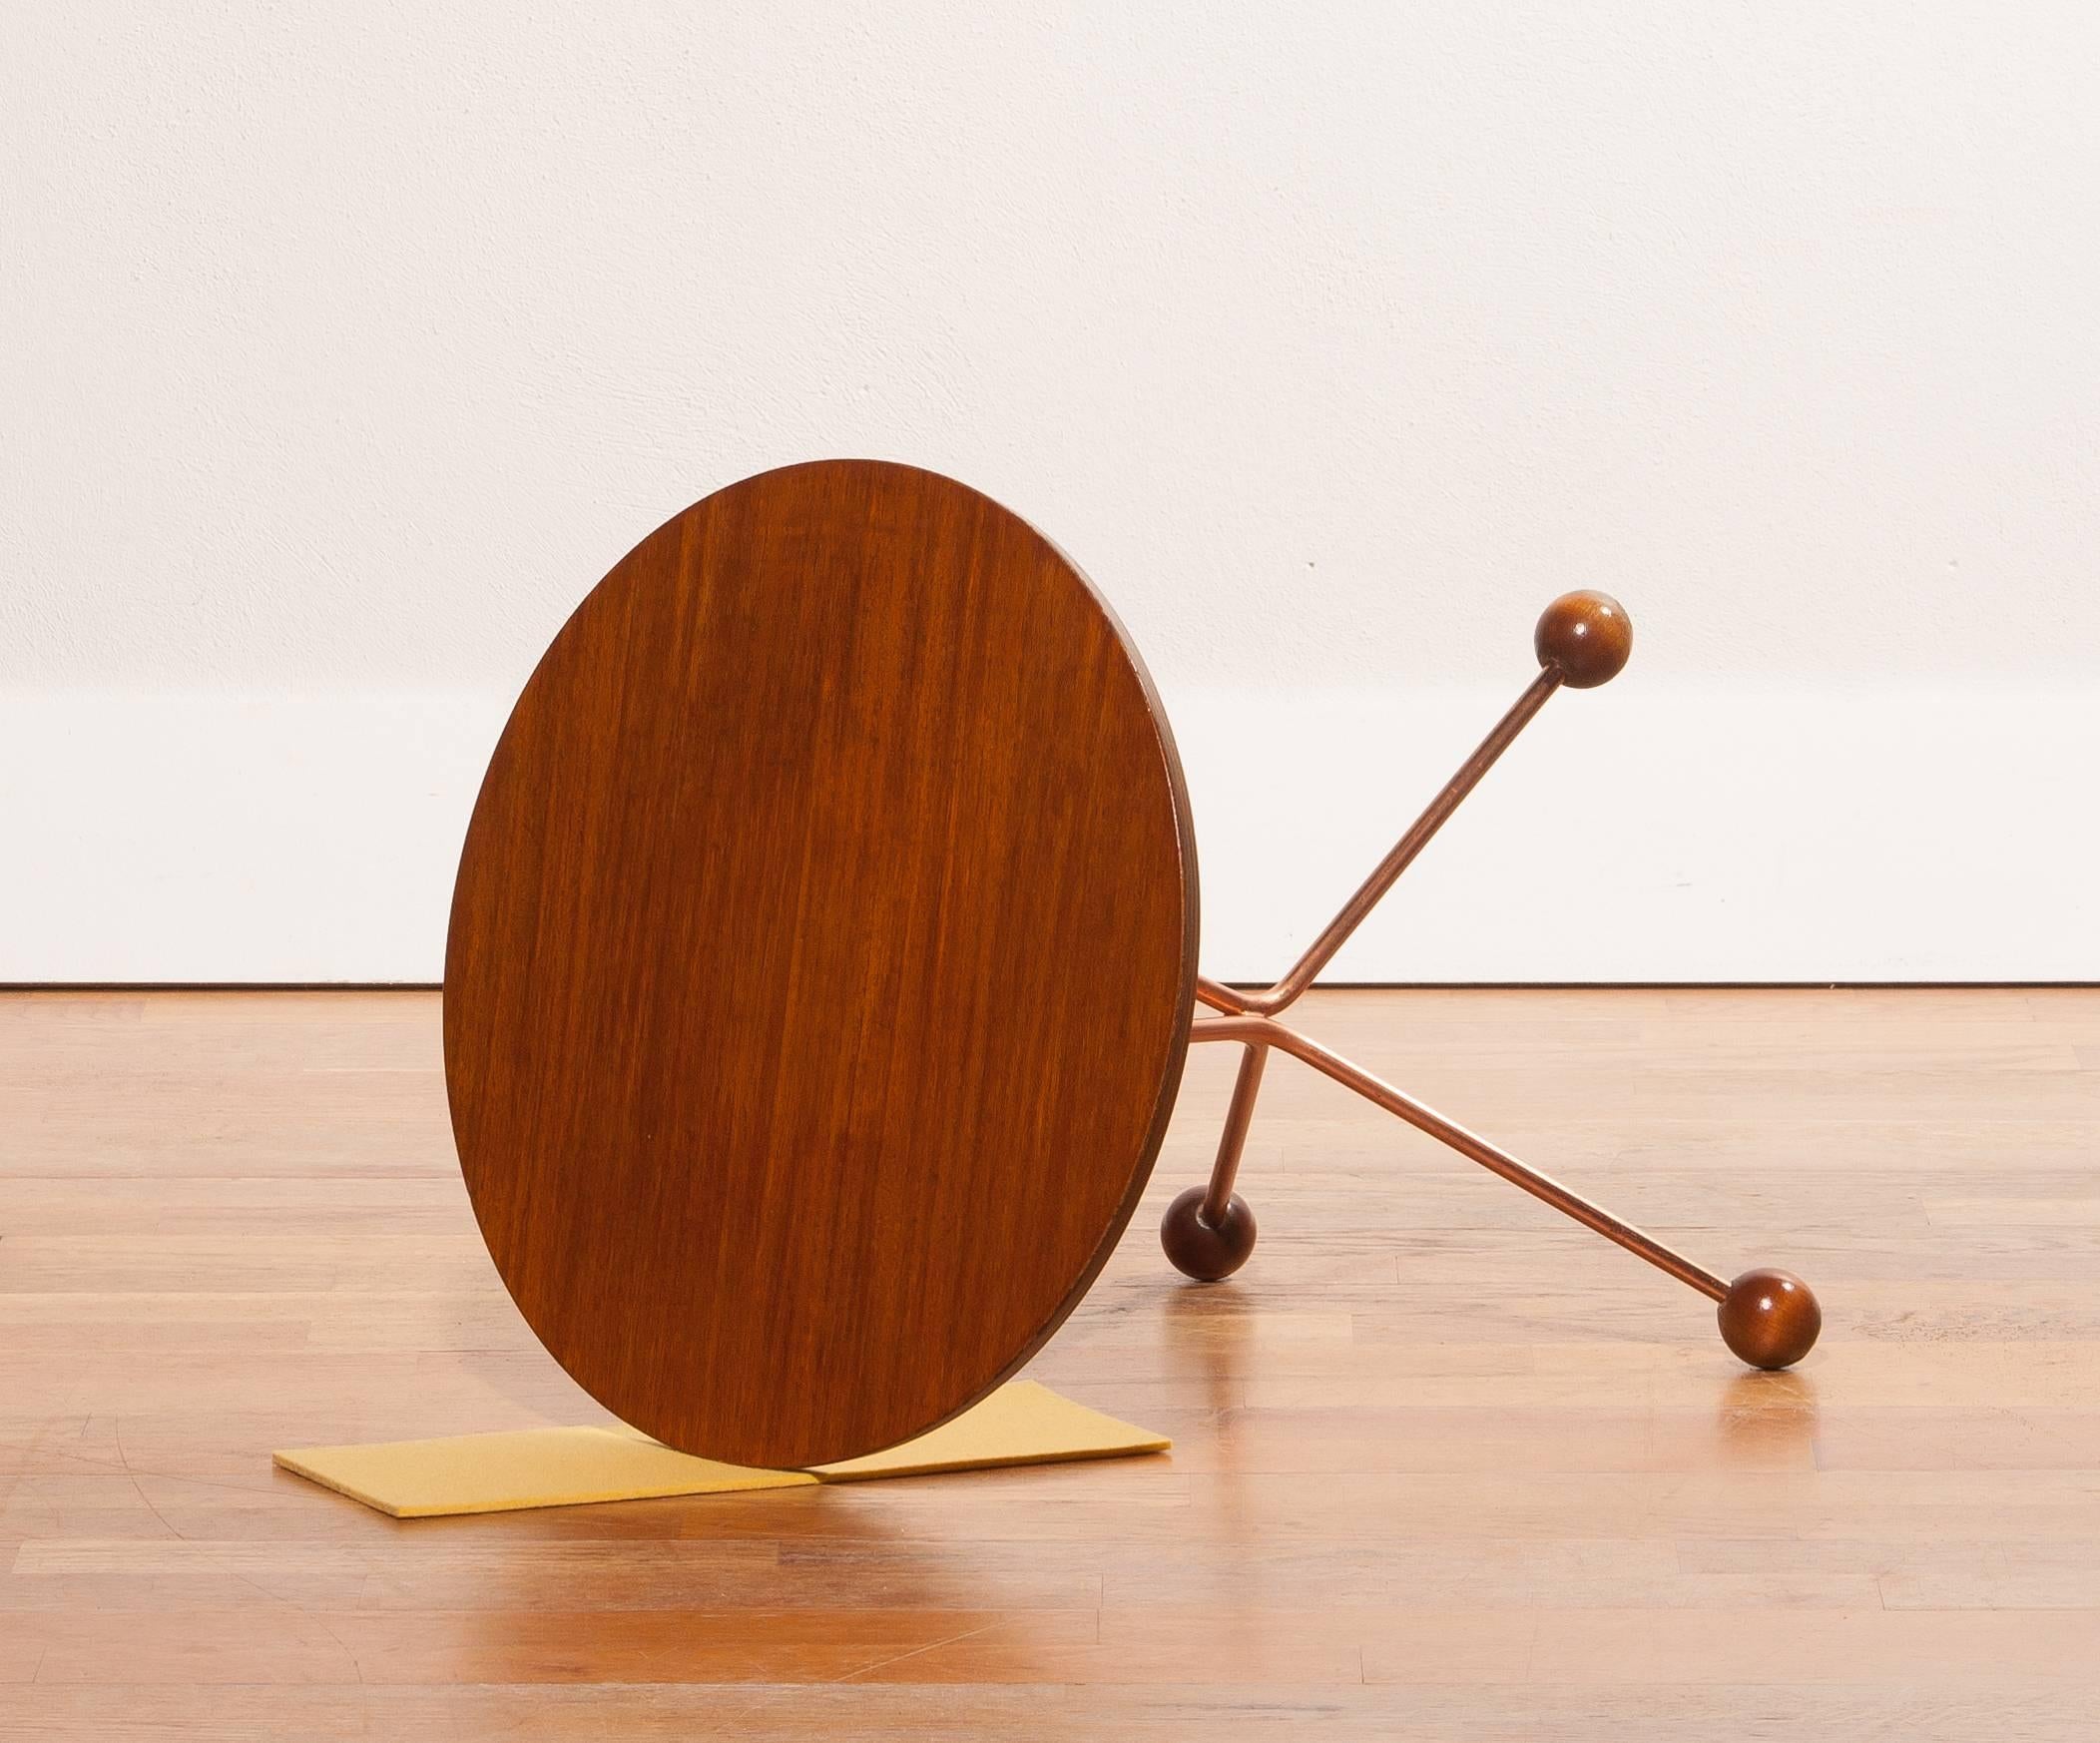 Beautiful tea-side table designed by Albert Larsson and produced by Alberts Tibro Sweden.
The tabletop is made of teak and copper.
The table is in very good condition.
Period 1950-1959
Dimension: H 44.5 cm, ø 40 cm.